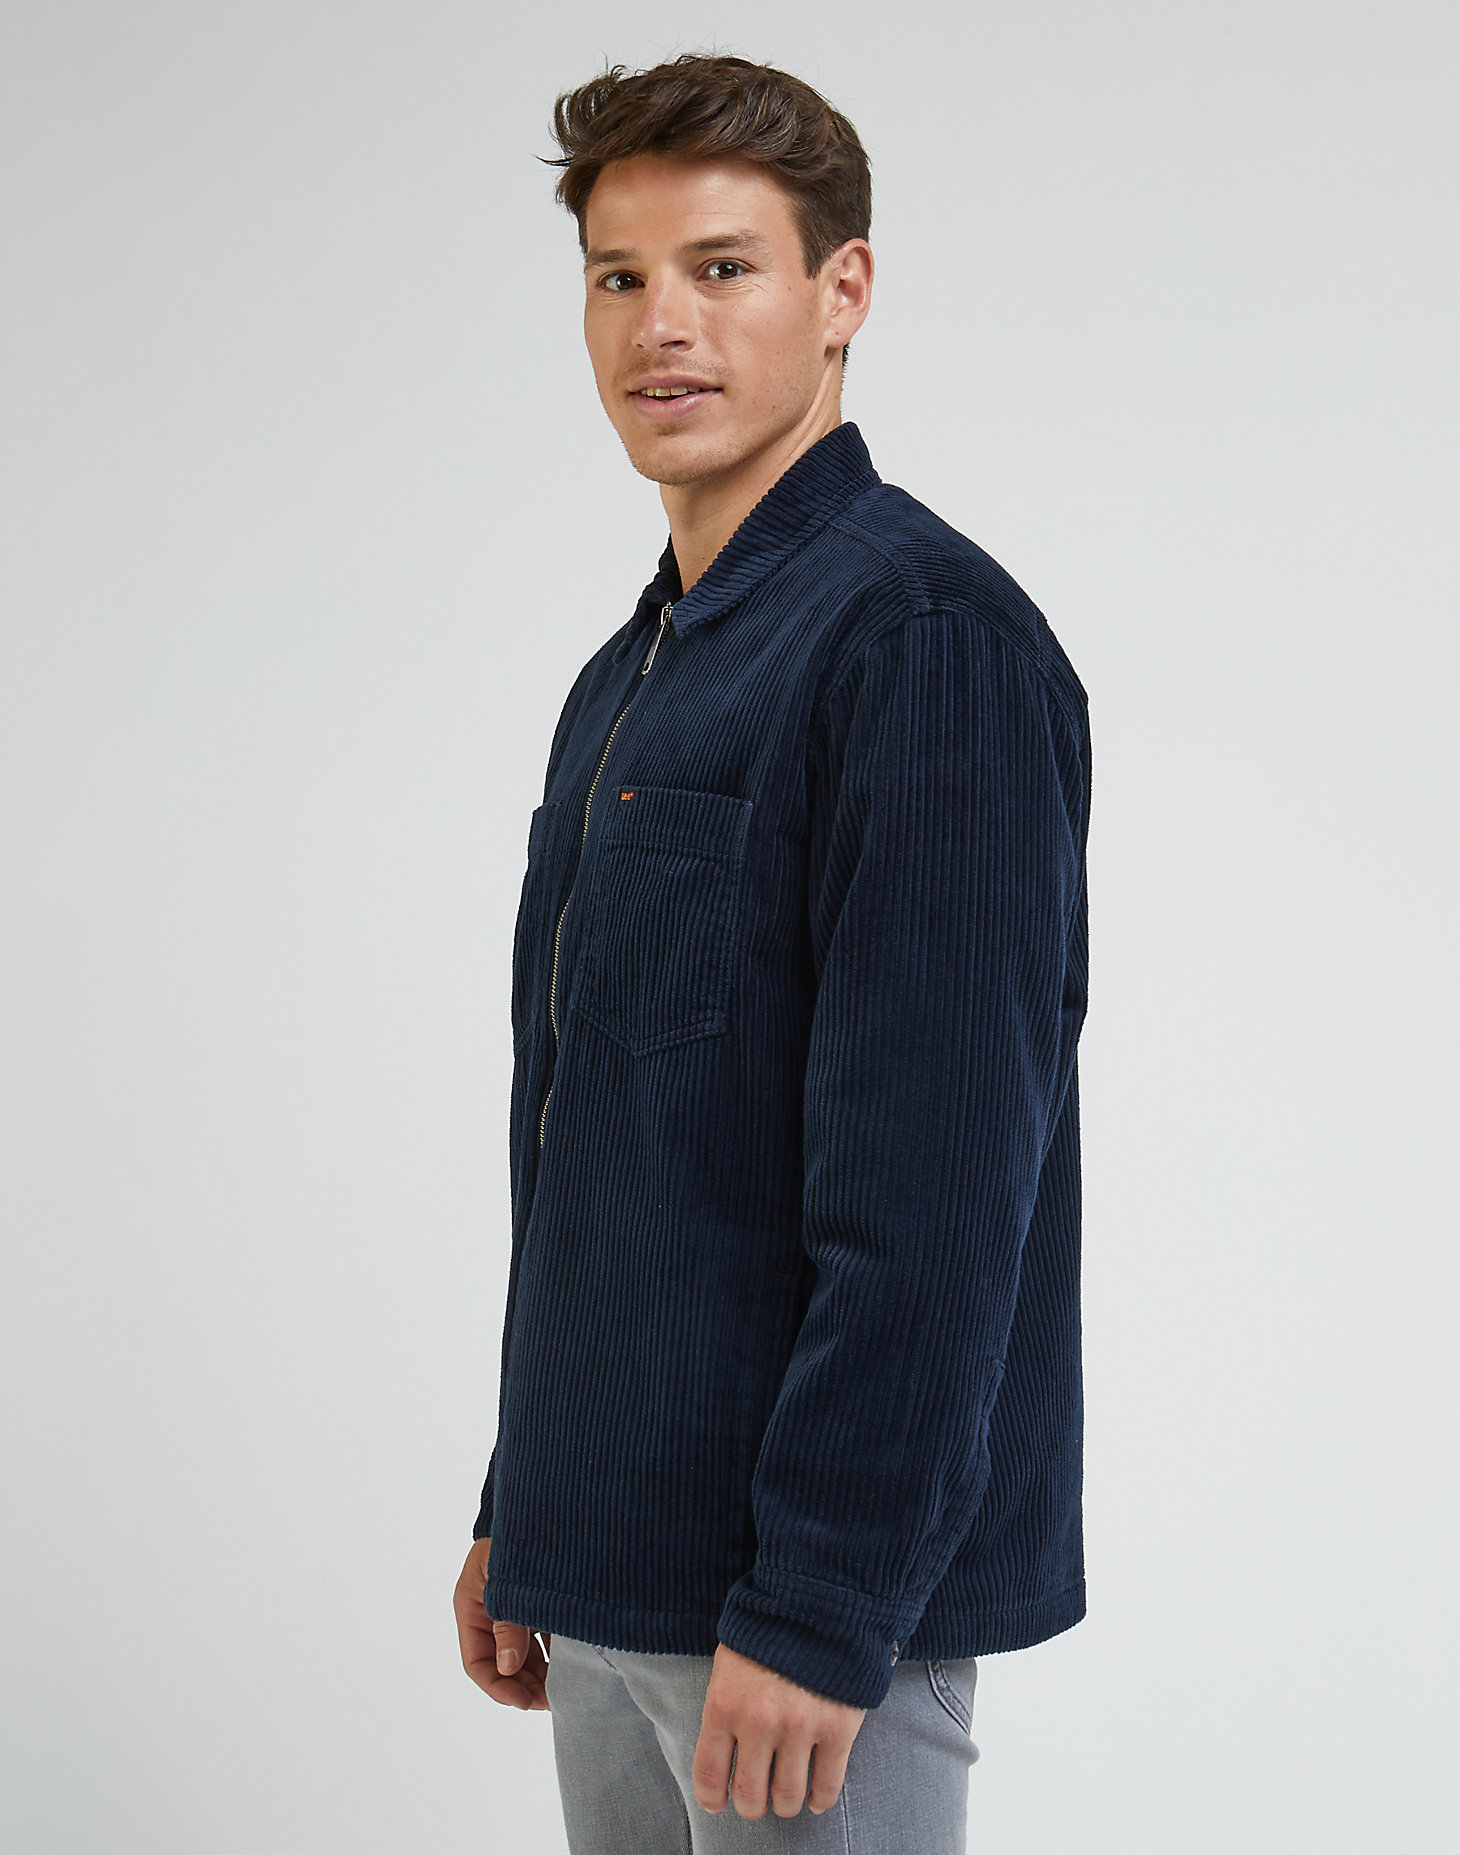 Relaxed Chetopa Overshirt in Sky Captain alternative view 3